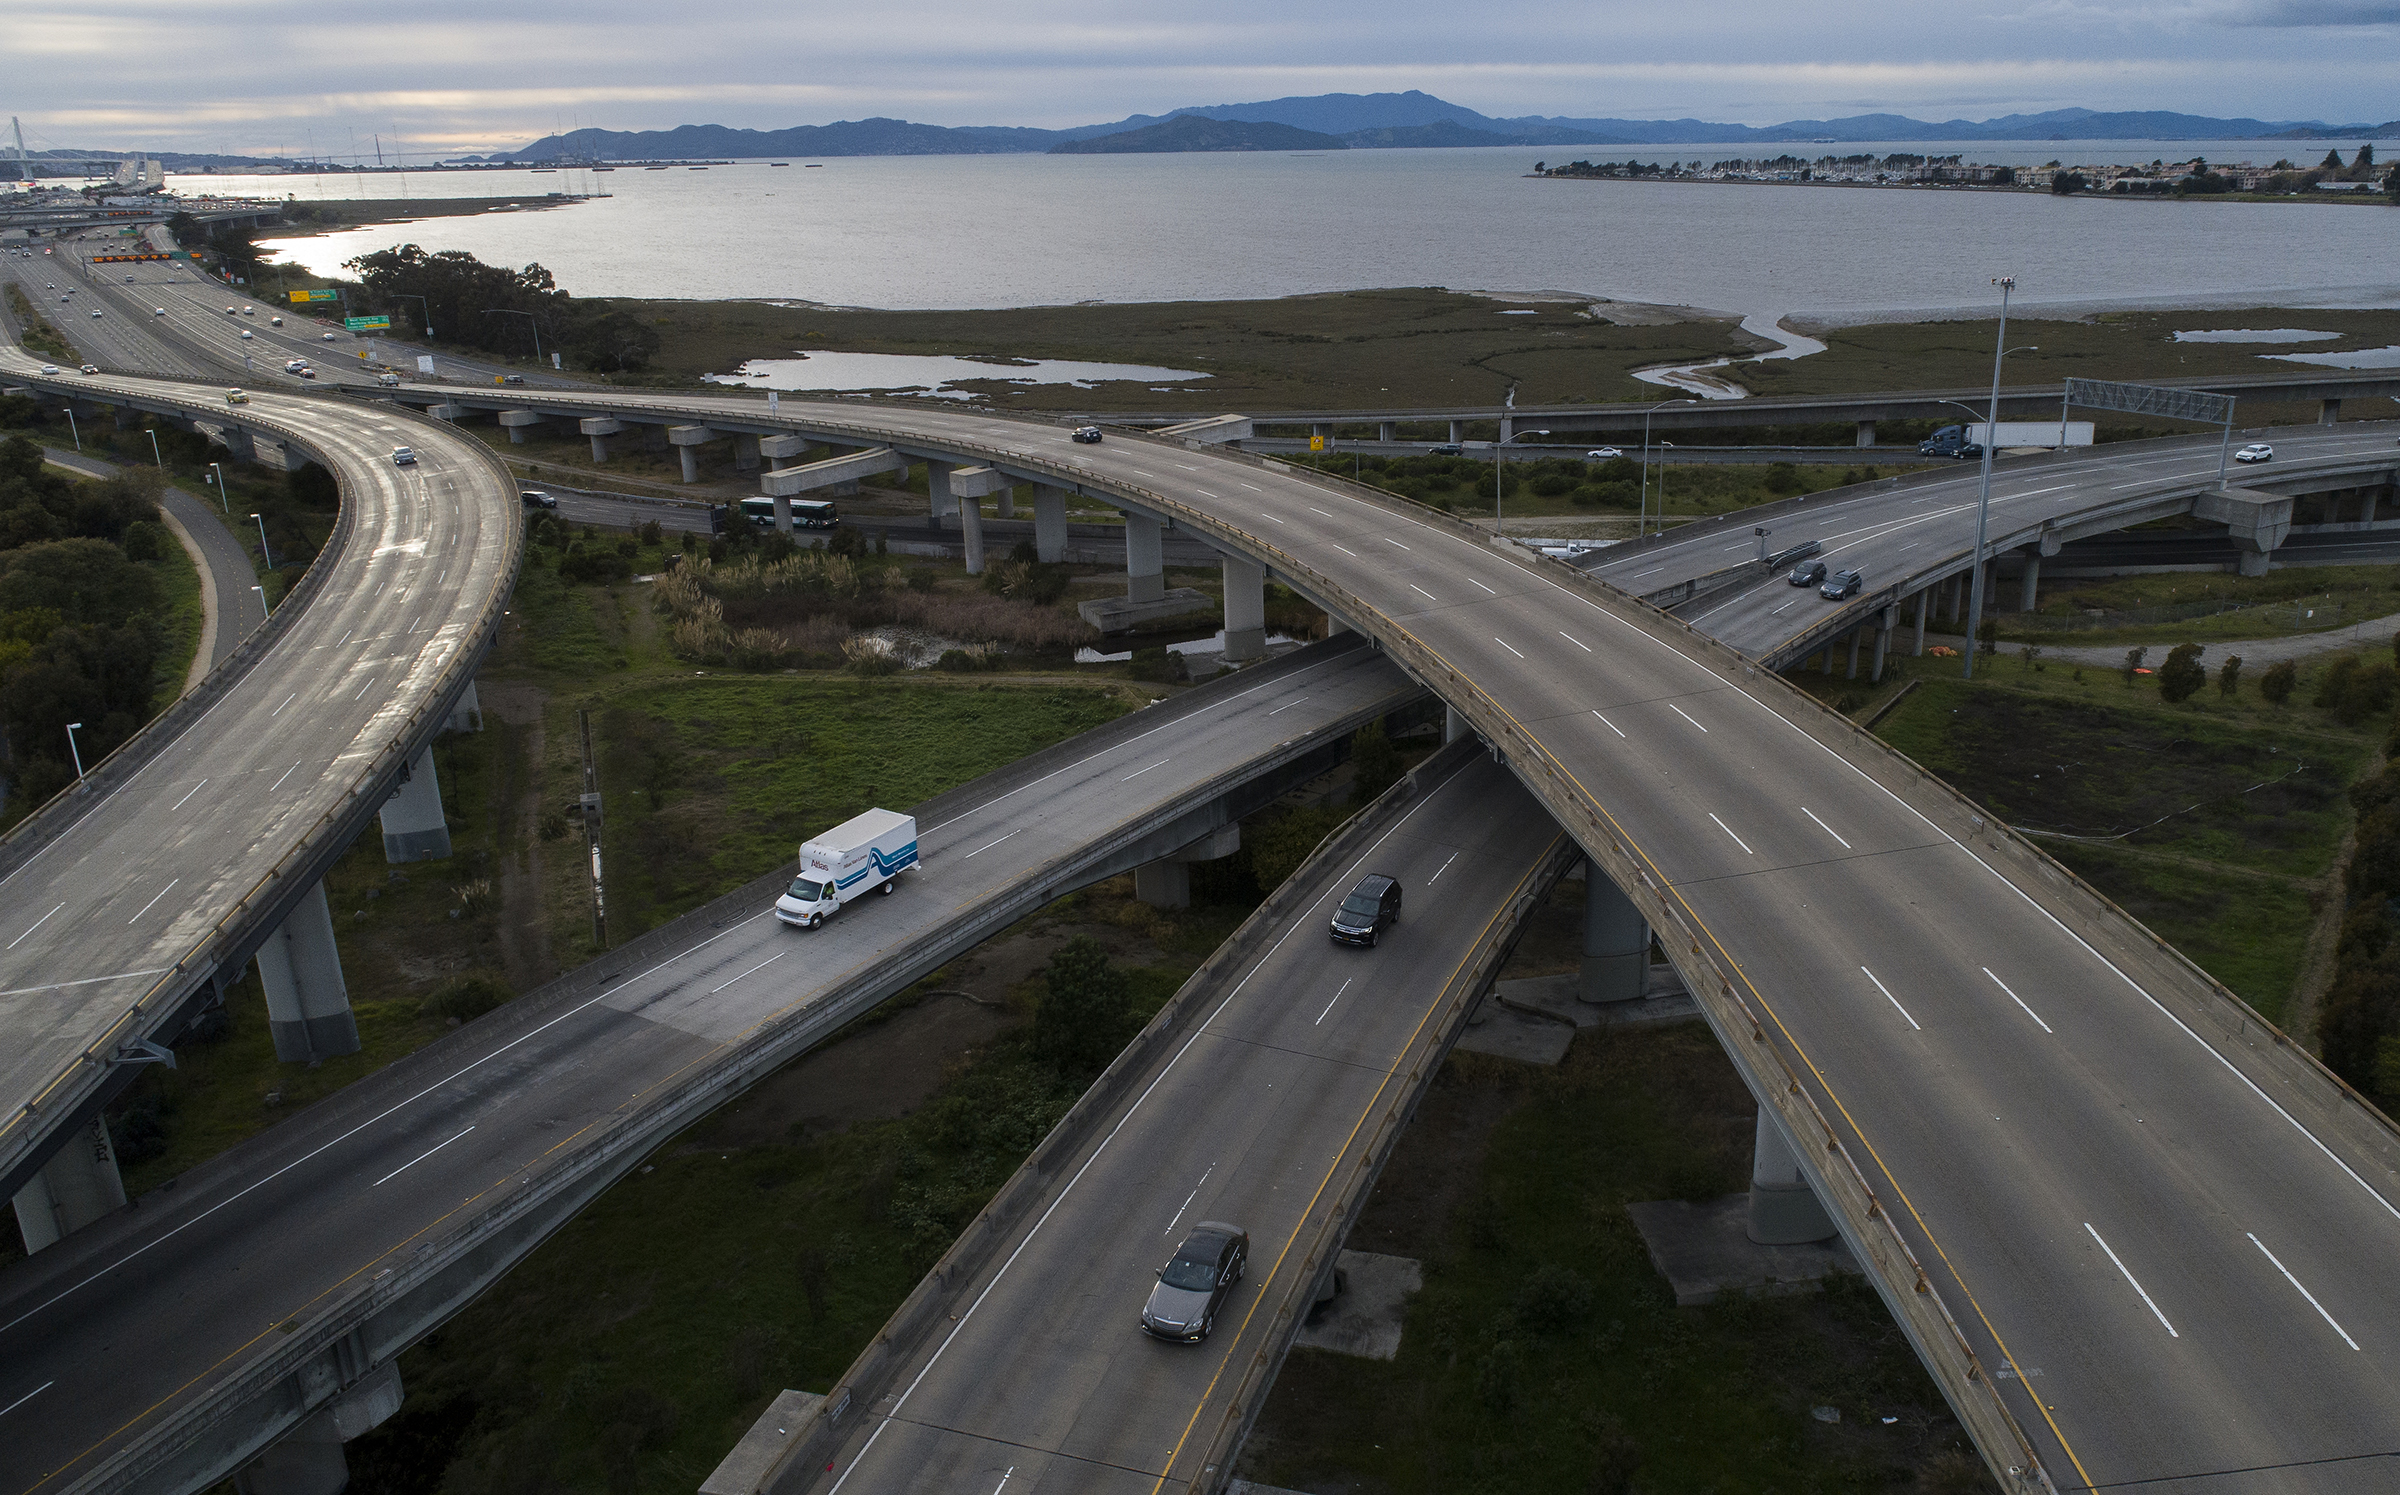 Light traffic is seen in this aerial view of the maze and the approach to the Bay Bridge in Oakland, Calif., on March 17, 2020. (Jane Tyska—Digital First Media/East Bay Times via Getty Images)